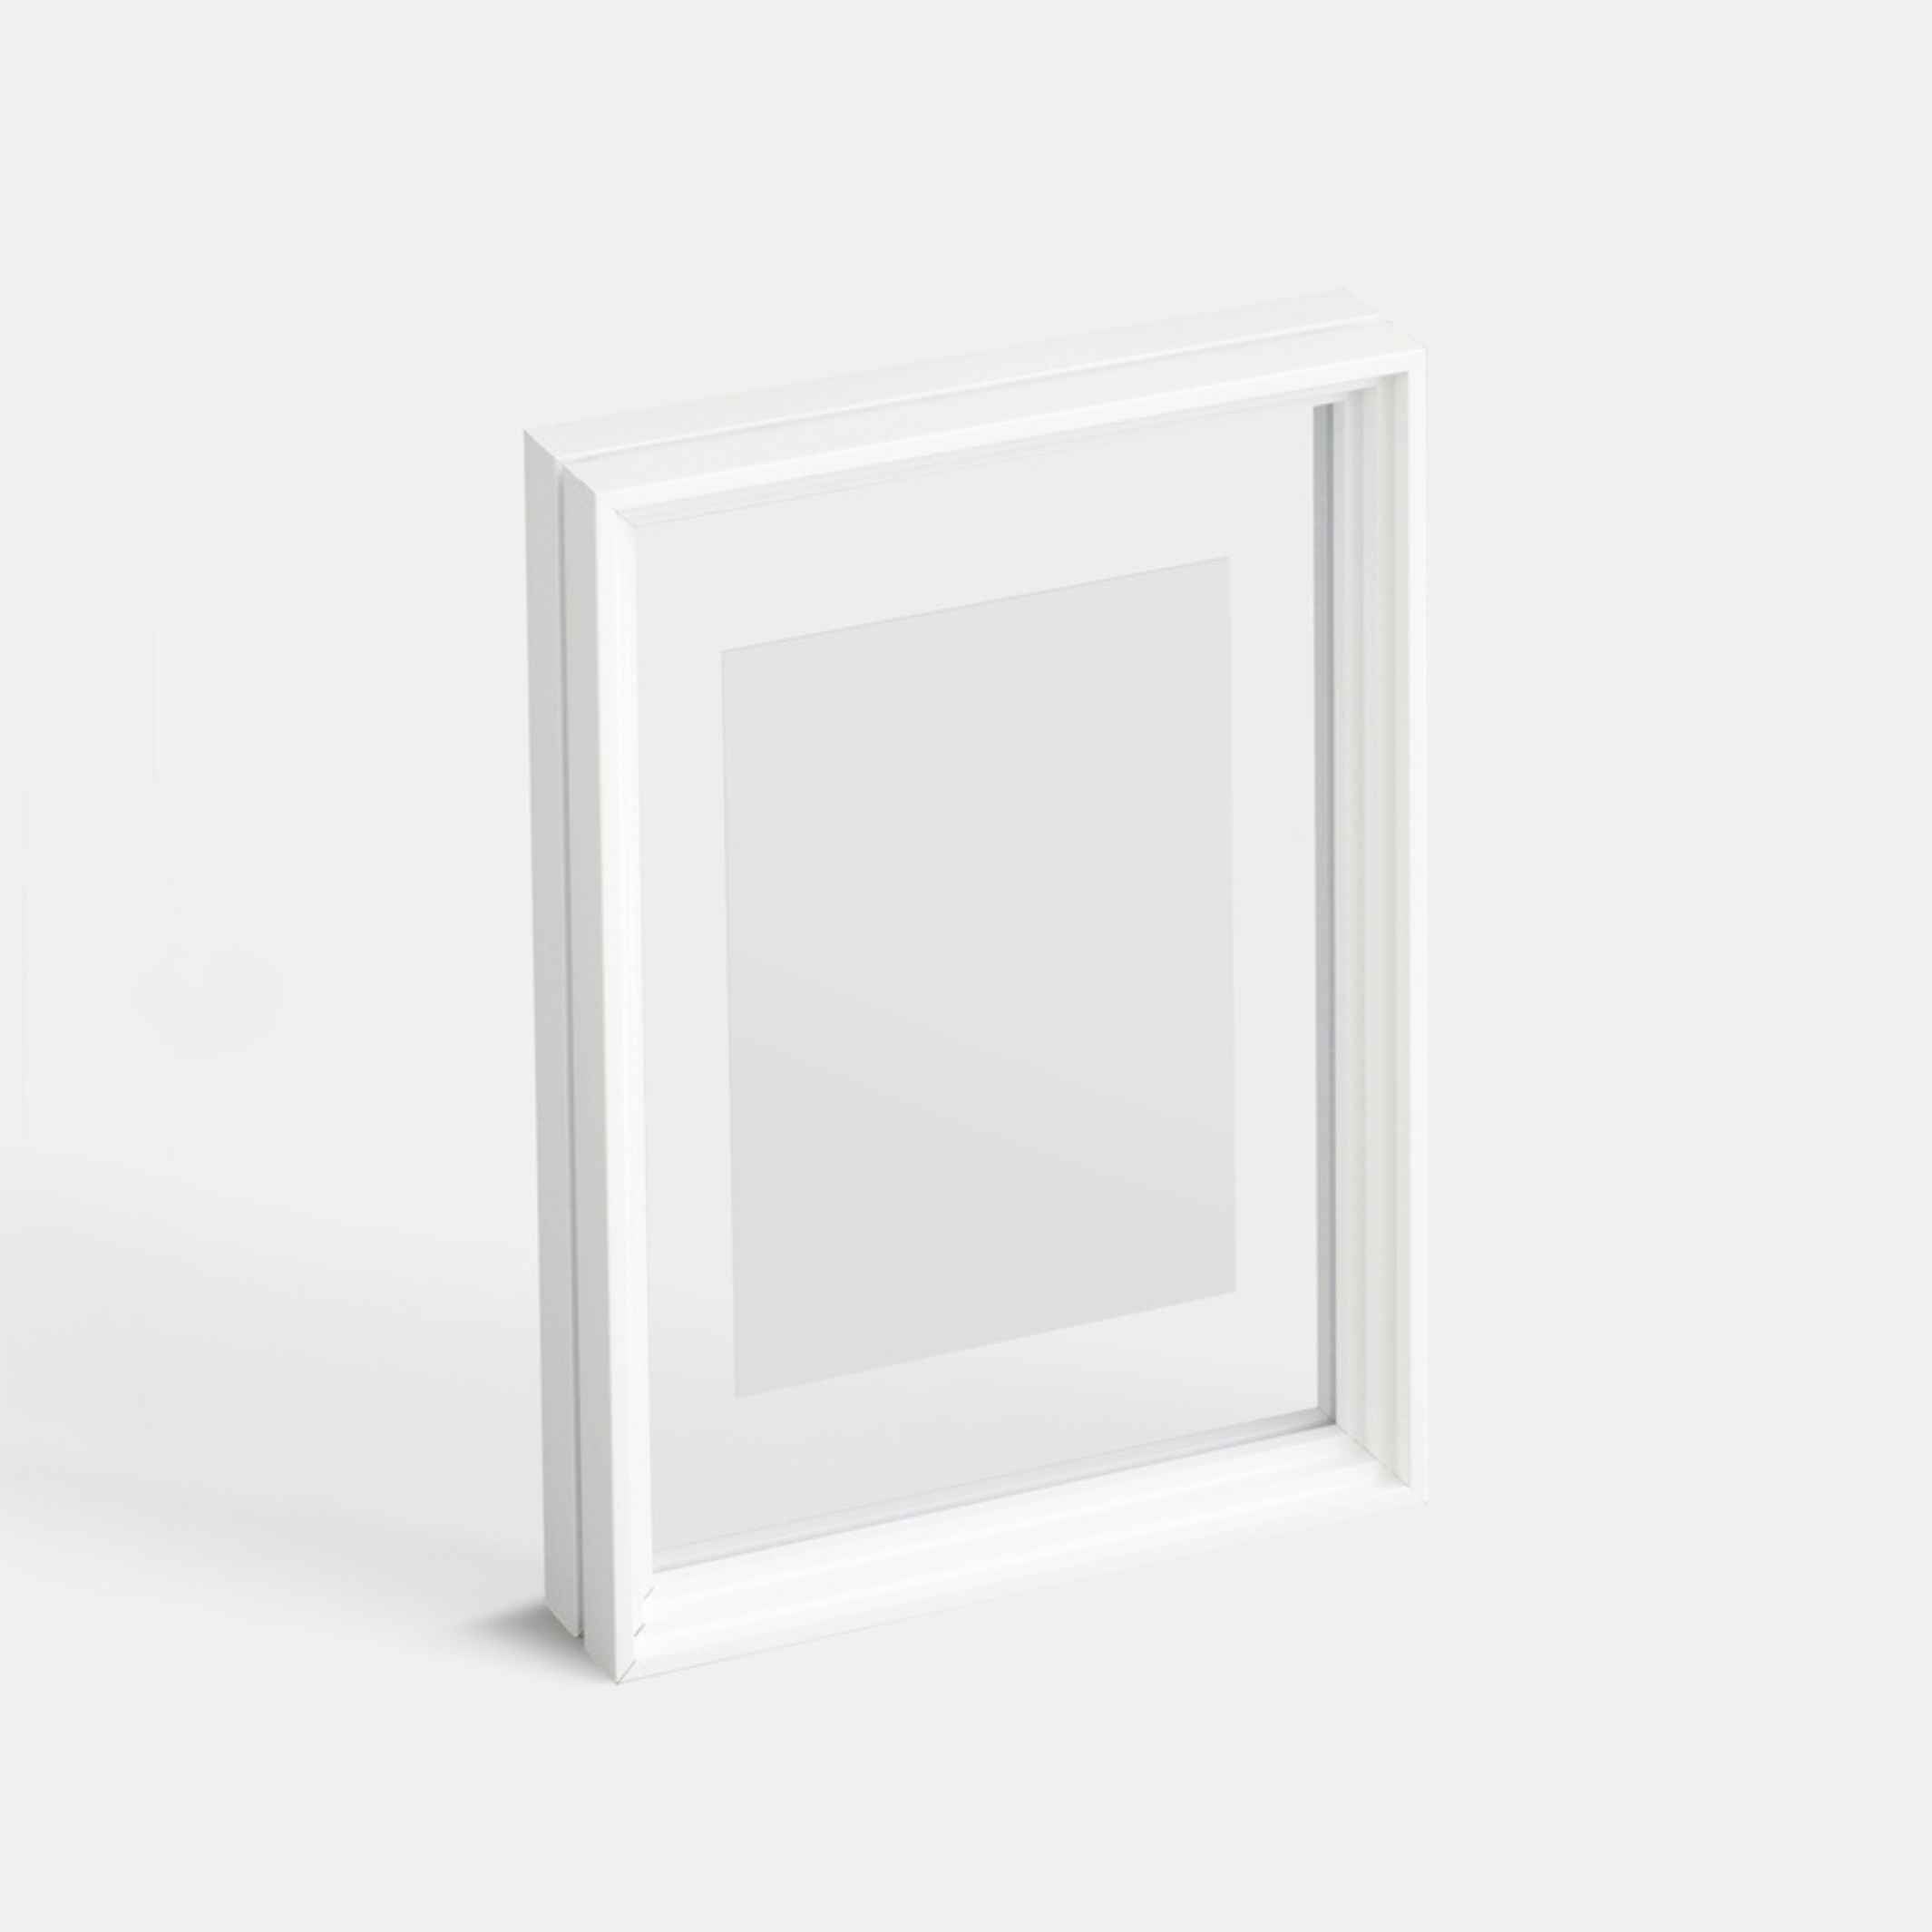 Picture frame - STANDING FRAME | Moebe